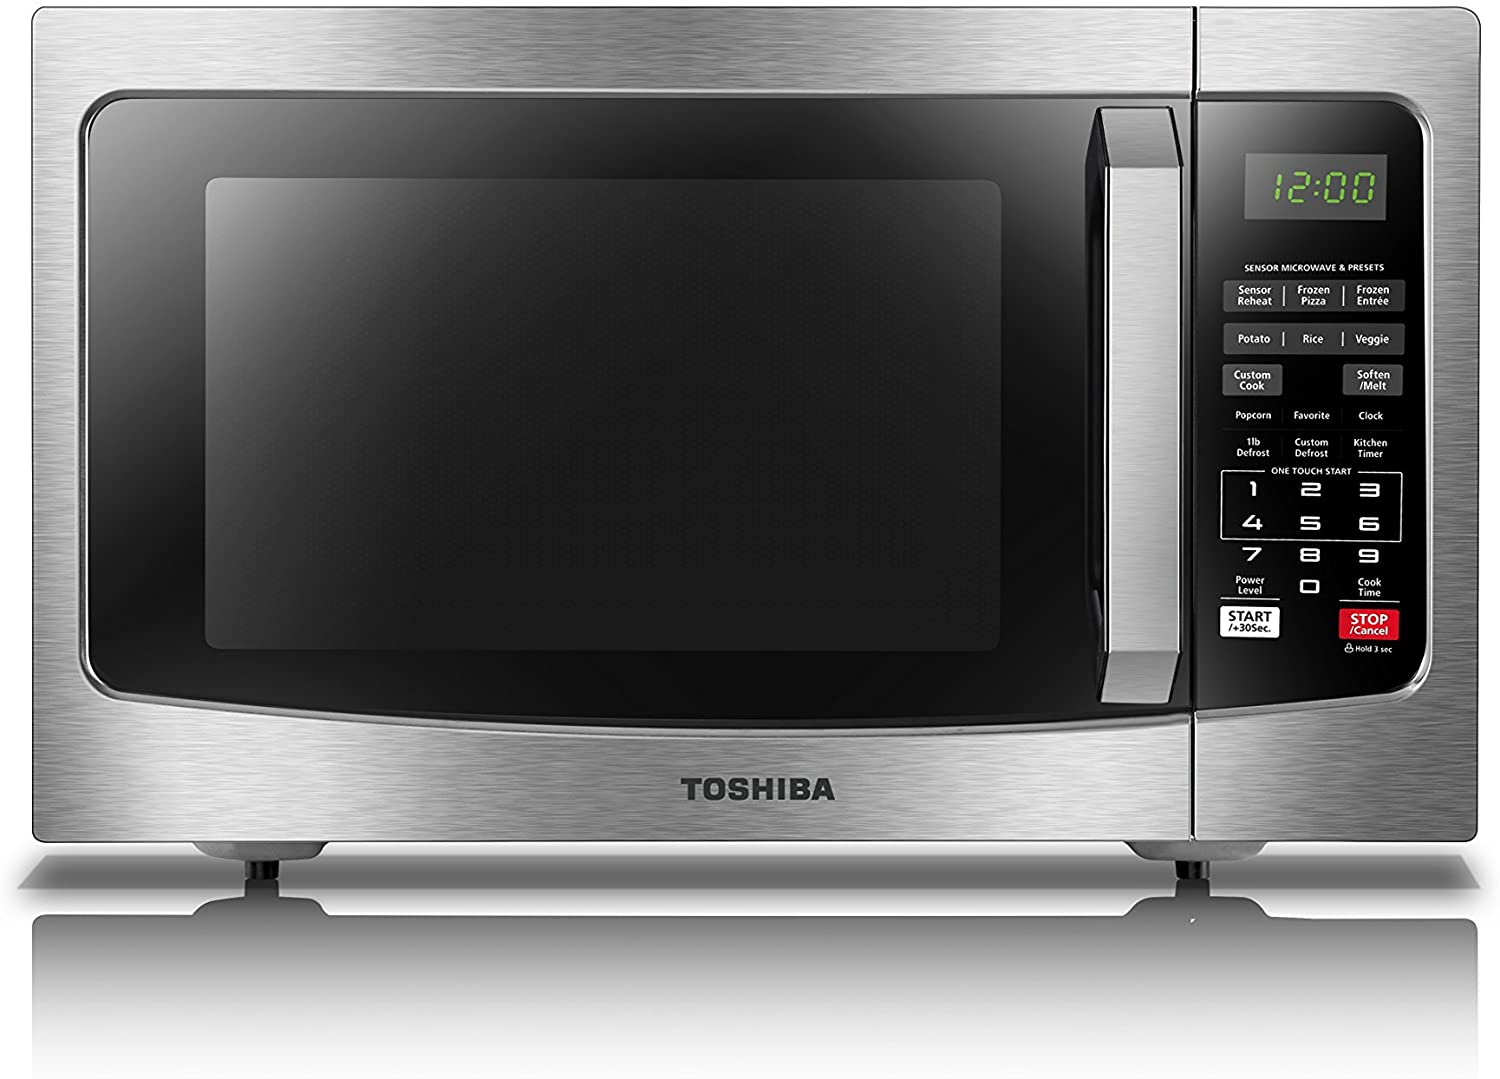 Toshiba EM131A5C-SS ECO Smart Stainless Microwave Oven, 1.2 Cu-Feet